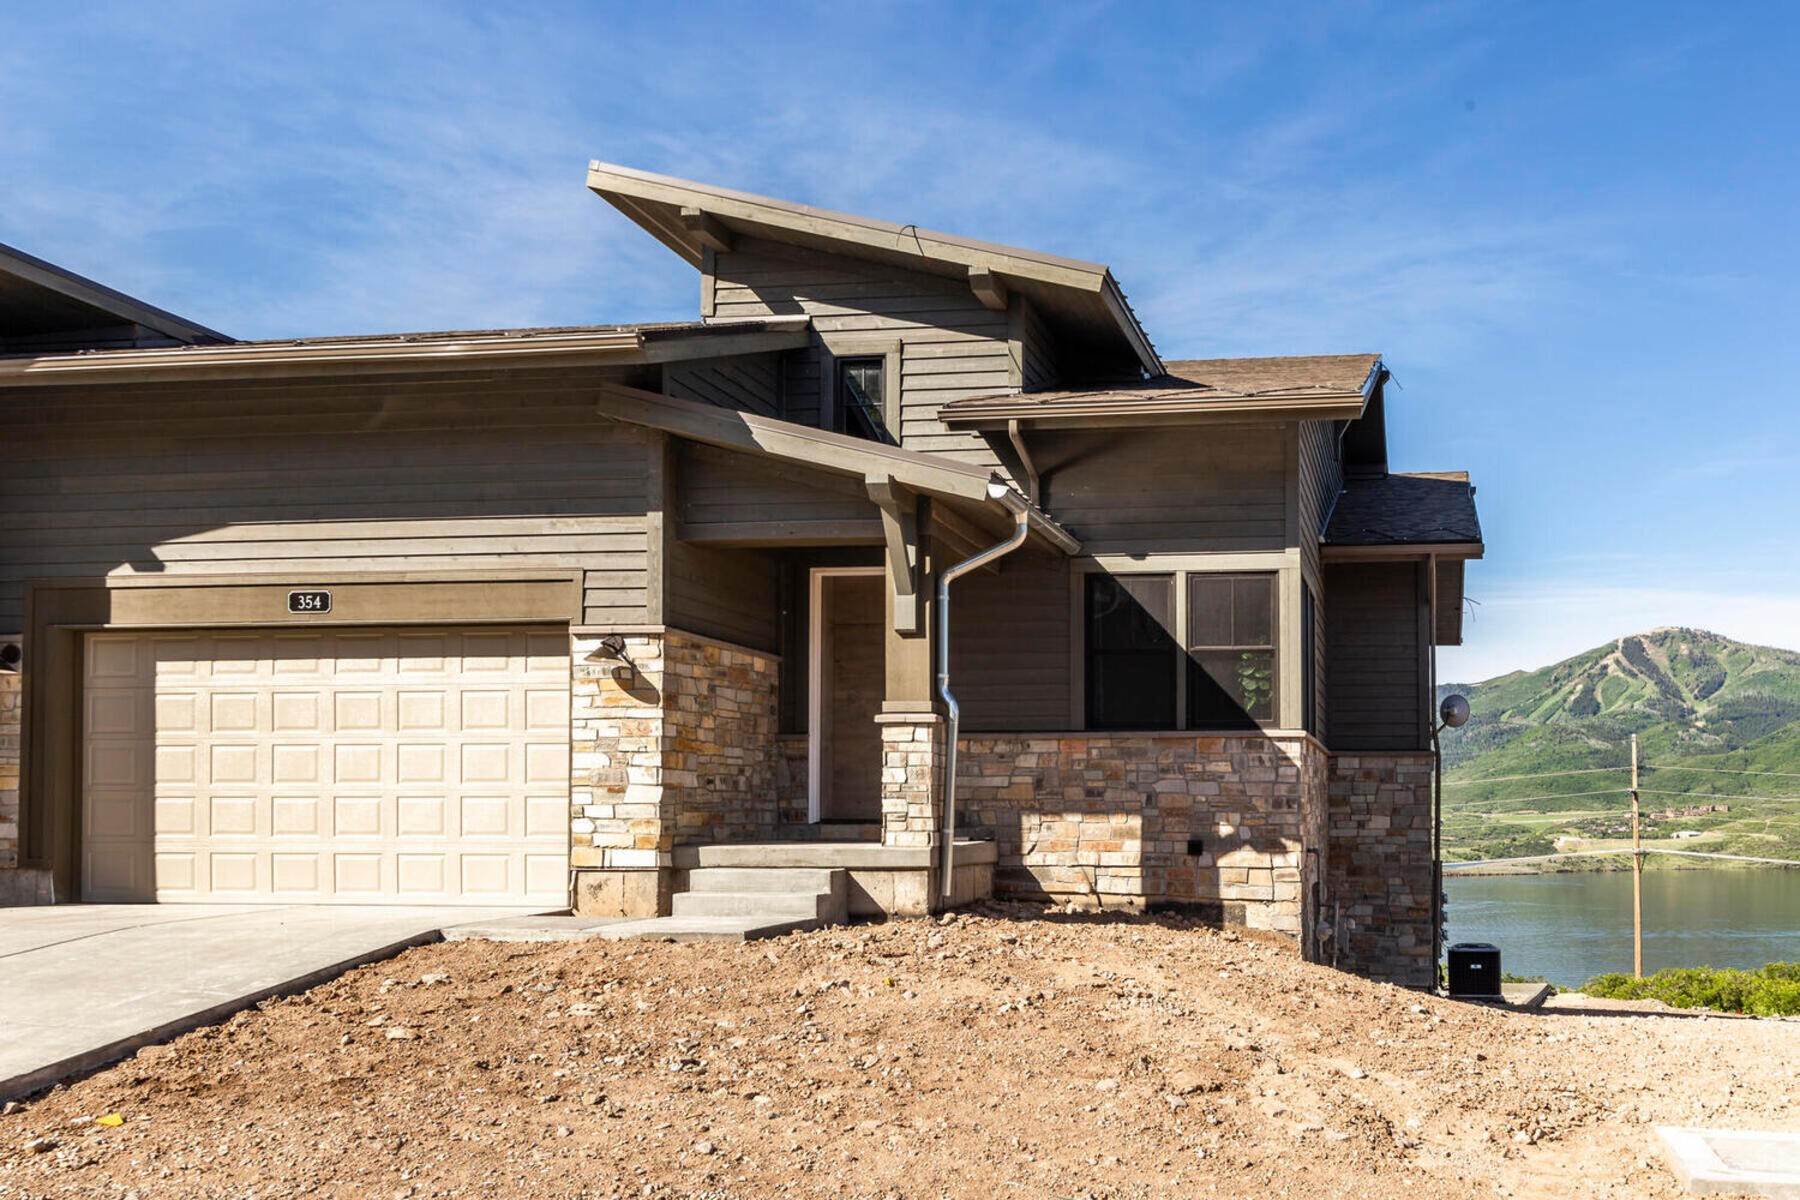 Townhouse for Sale at New Lakefront Community with Views of Deer Valley Resort & Jordanelle Reservoir 408 E Overlook Loop, Lot 14, Phase 2 Hideout Canyon, Utah 84036 United States